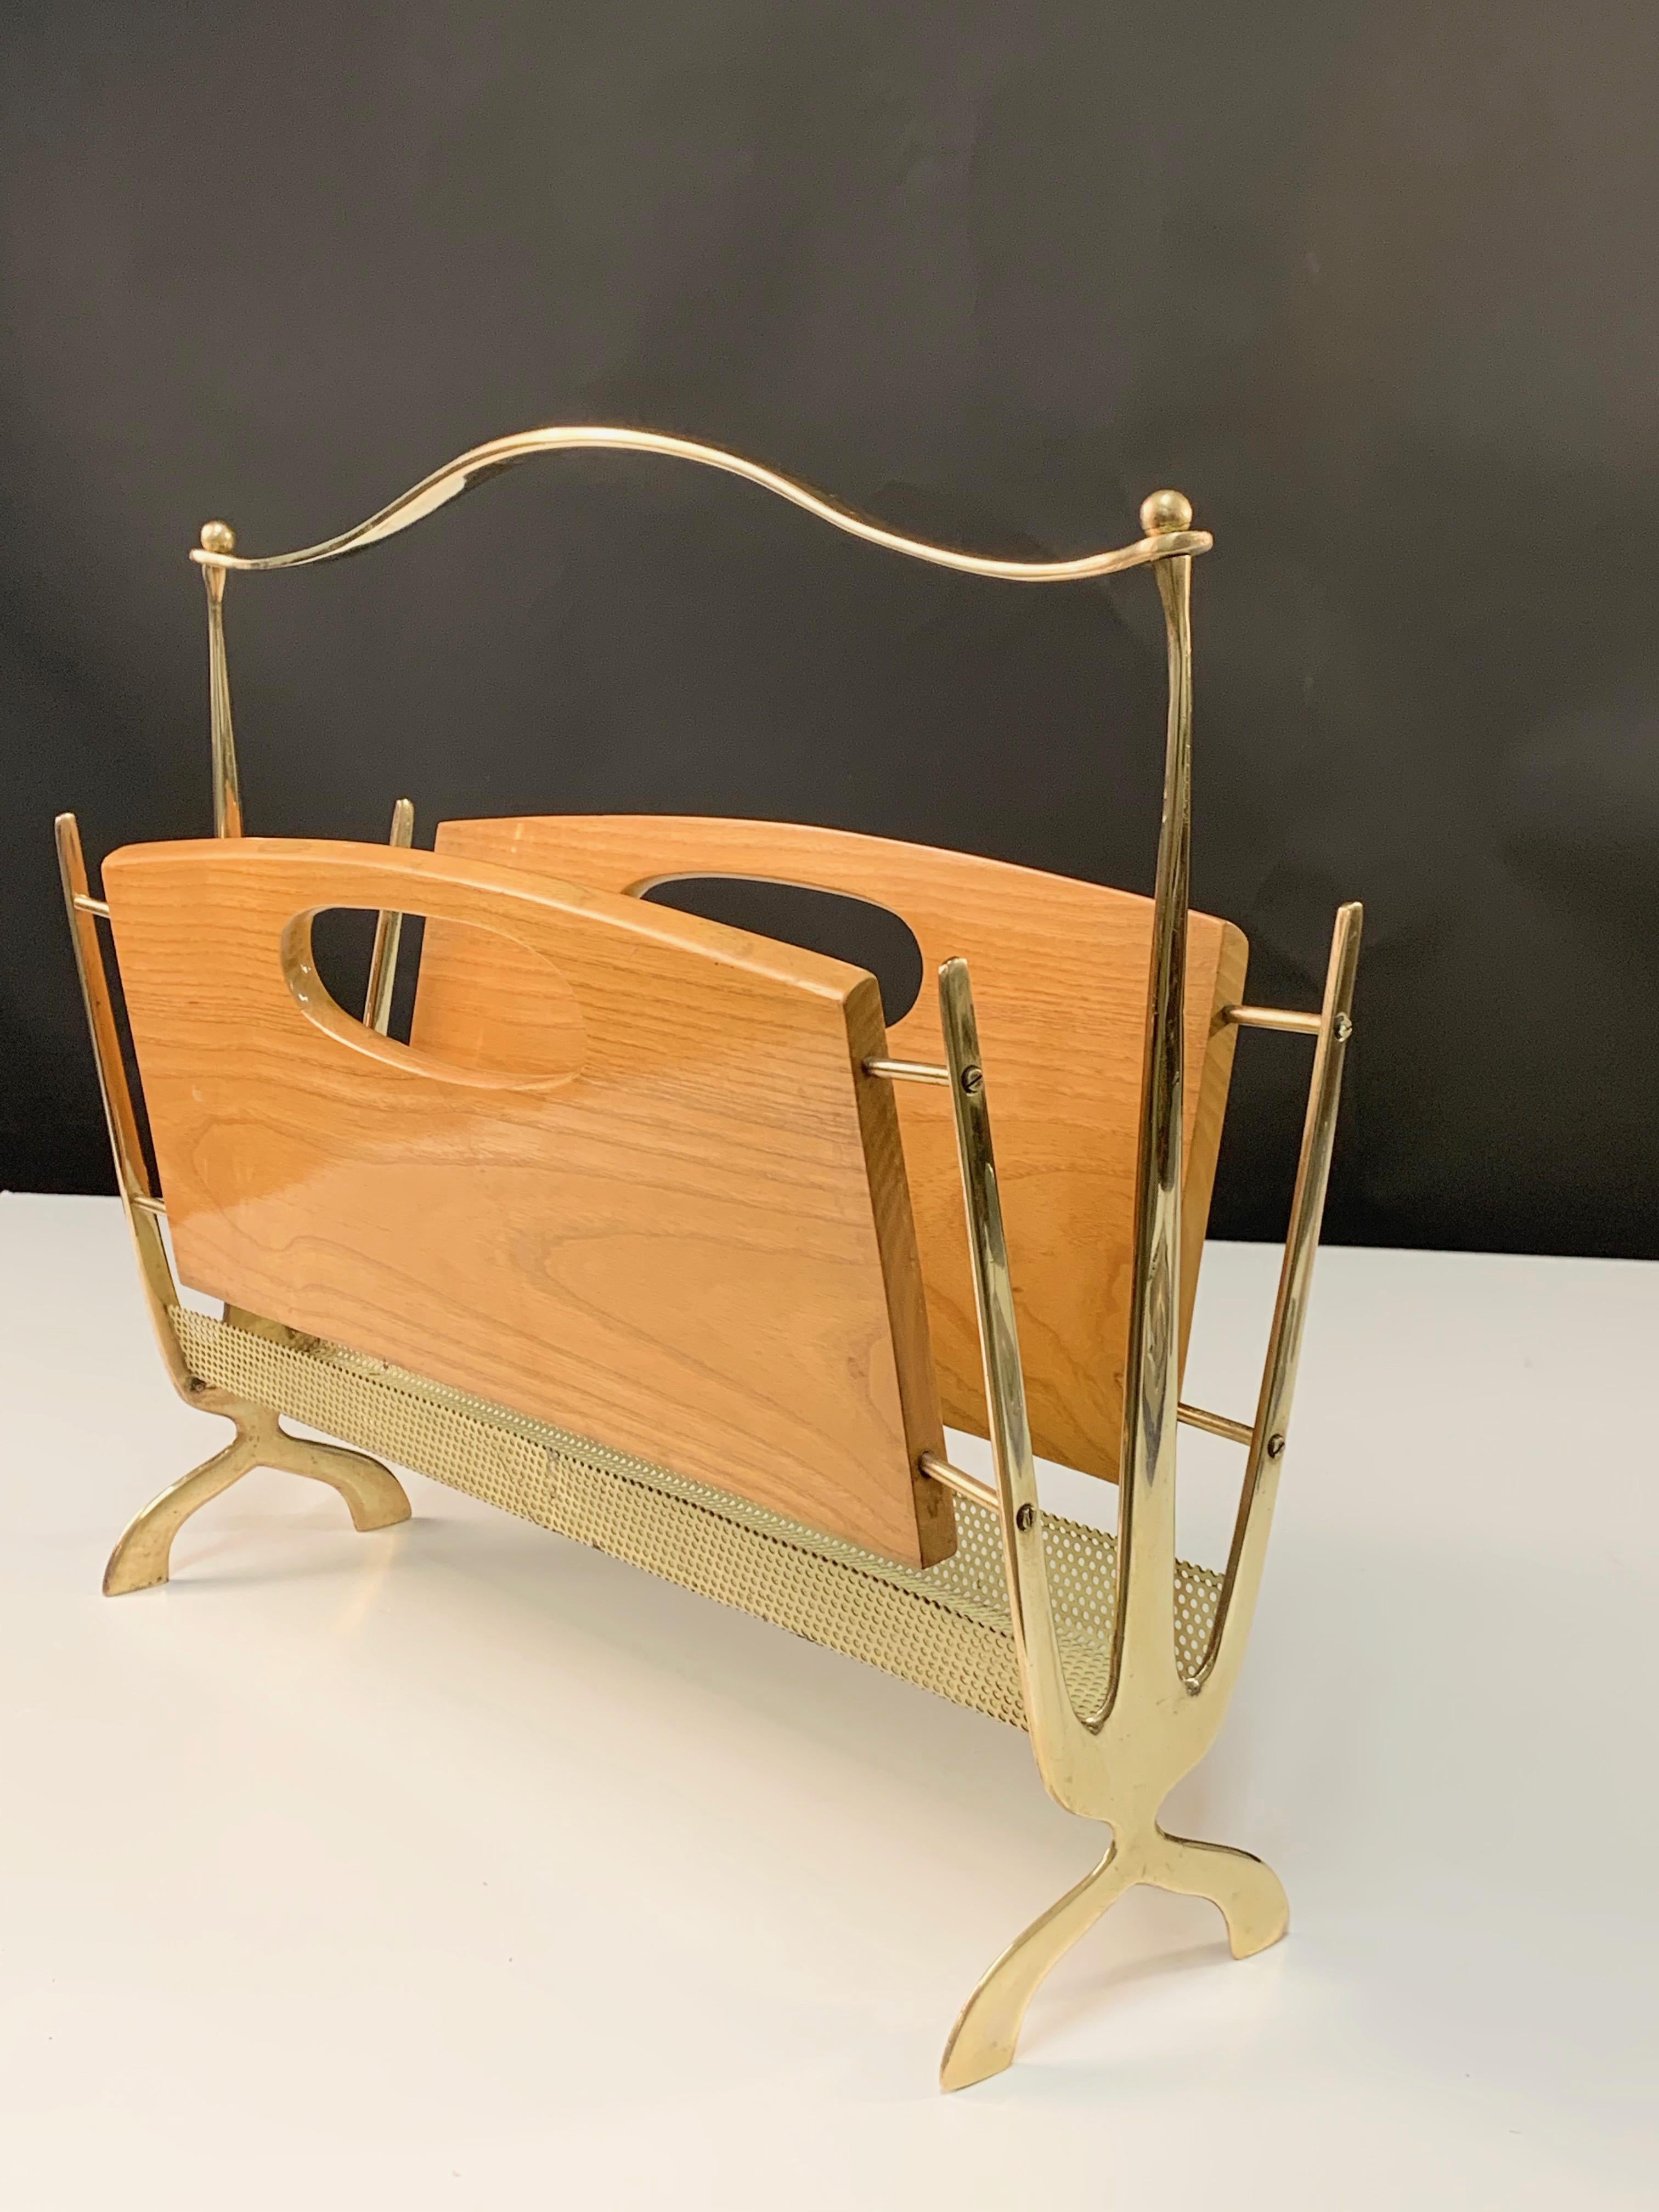 Handmade magazine rack in brass and chestnut wood, beautifully made during the 1950s in France.

Between the two chesnut slabs, you will find your favourite magazines or books laid on the amazing brass structure, that make this timeless piece